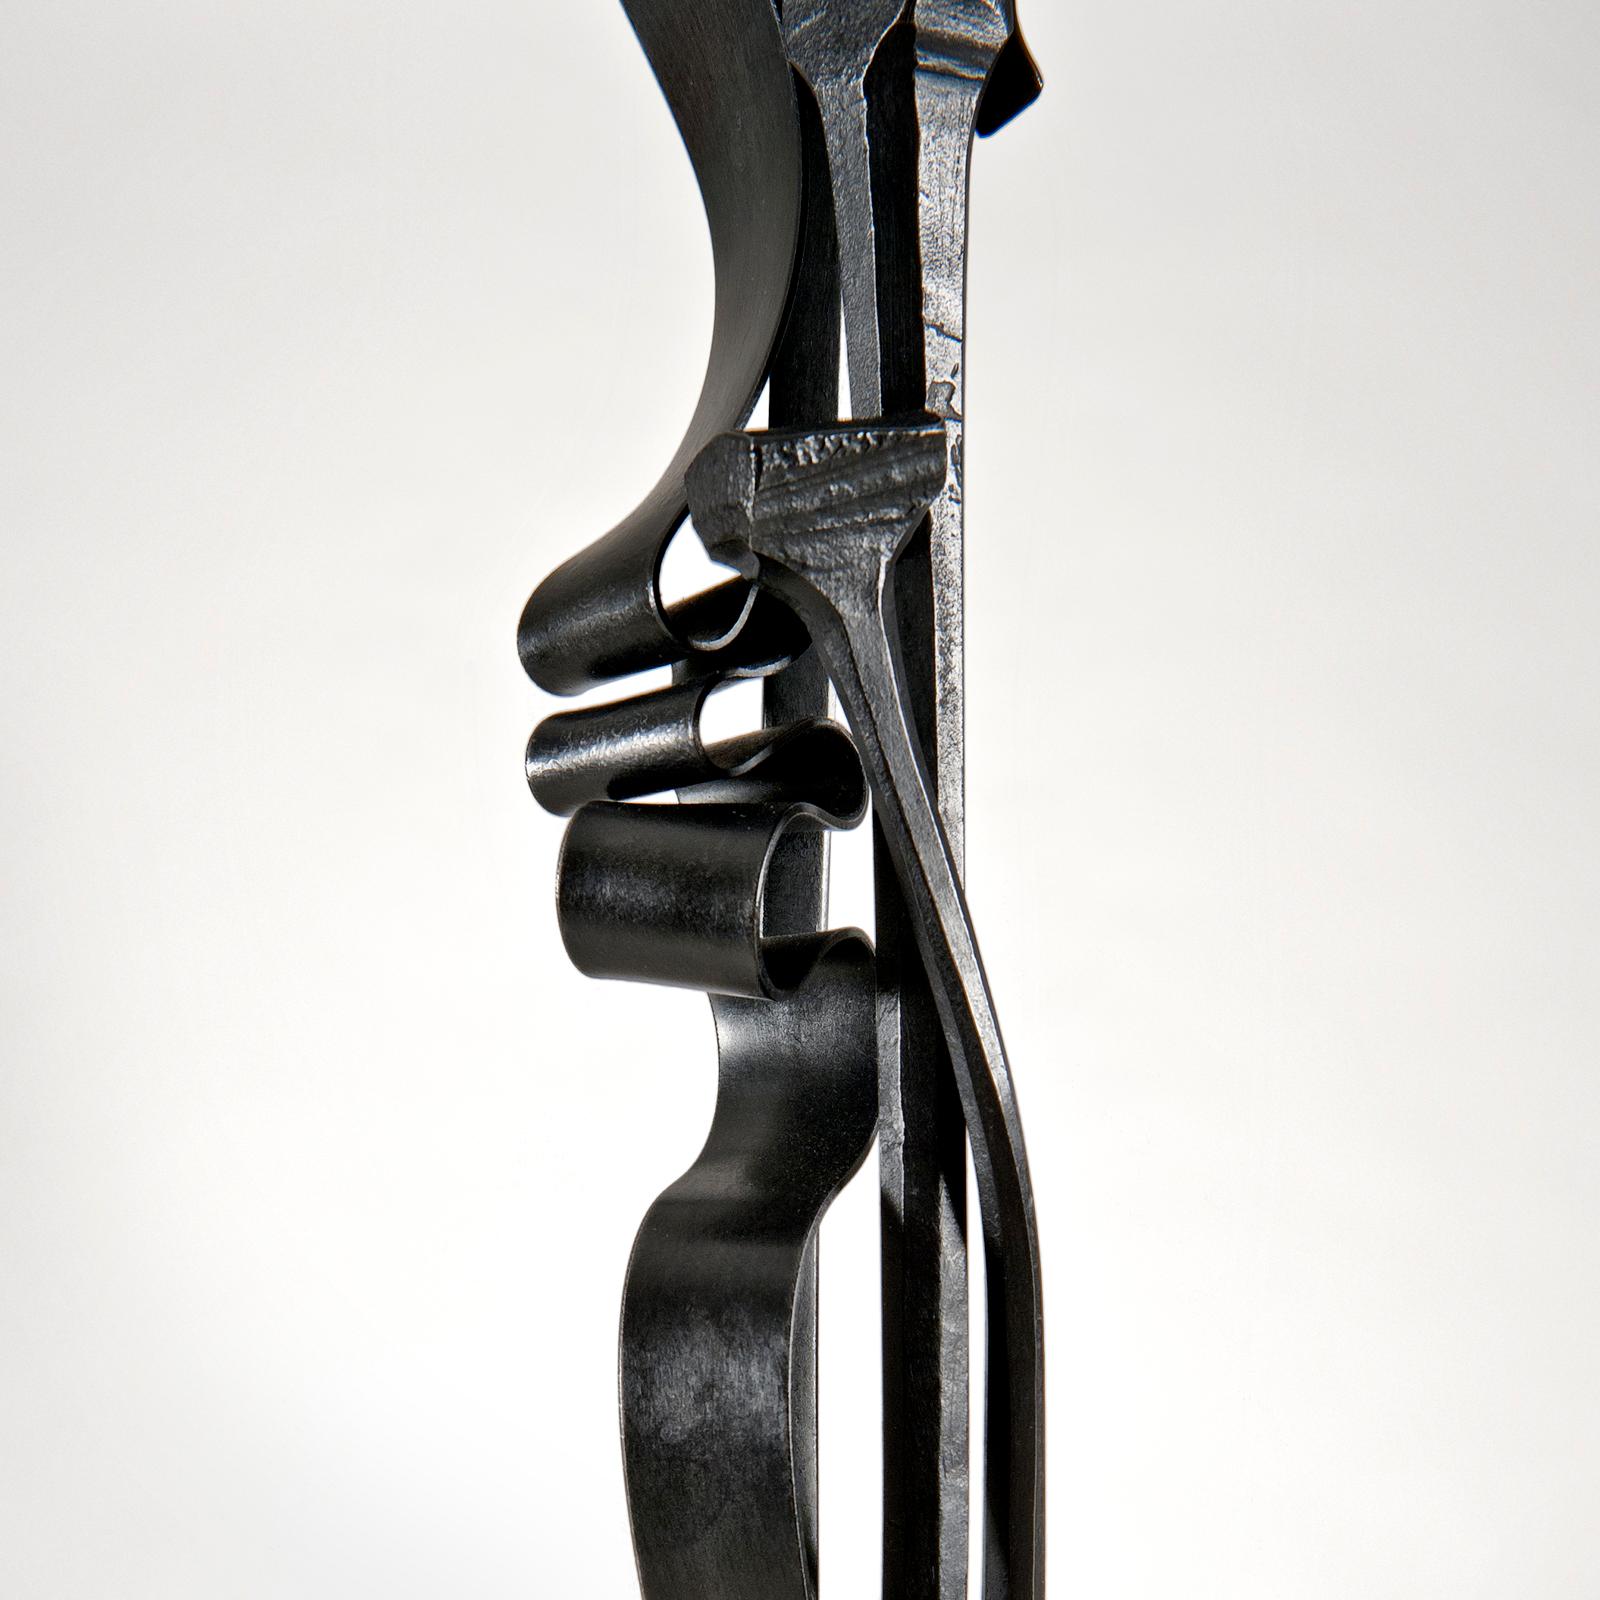 Contemporary Scepter Candleholders by Albert Paley For Sale